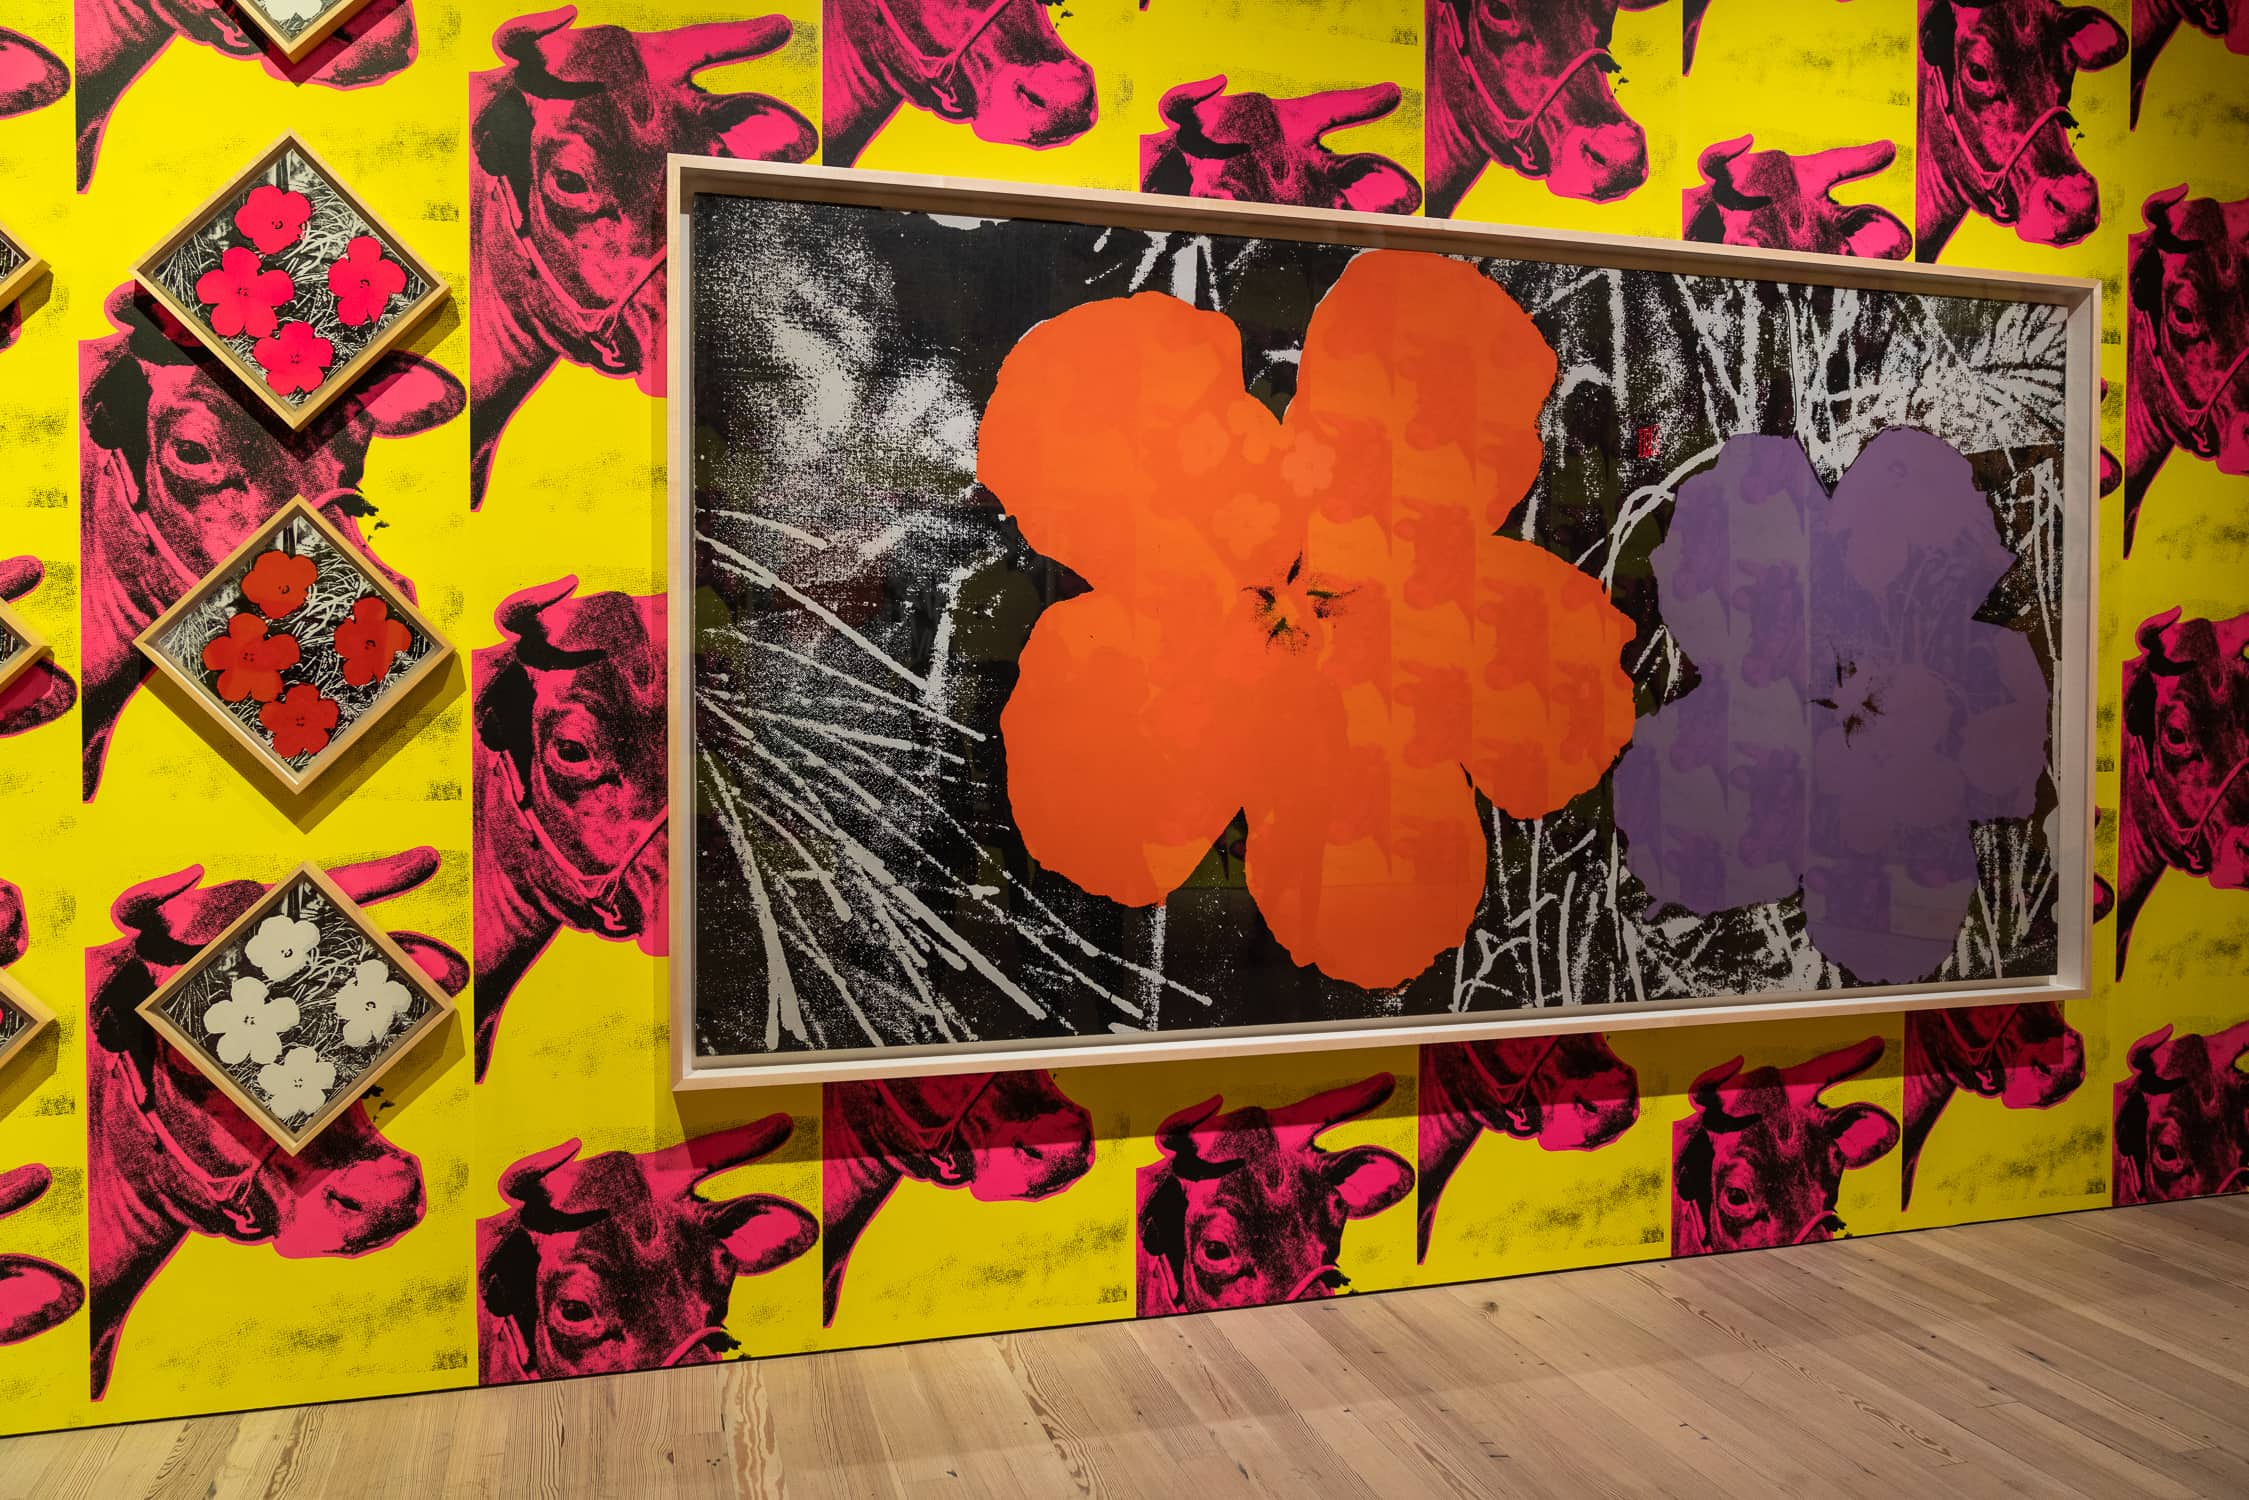 Andy Warhol, Cow Wallpaper and Flowers, installation at the Whitney Museum of American Art. © The Andy Warhol Foundation for the Visual Arts, Inc./Artists Rights Society (ARS). Photo by @AbbyWarhola.